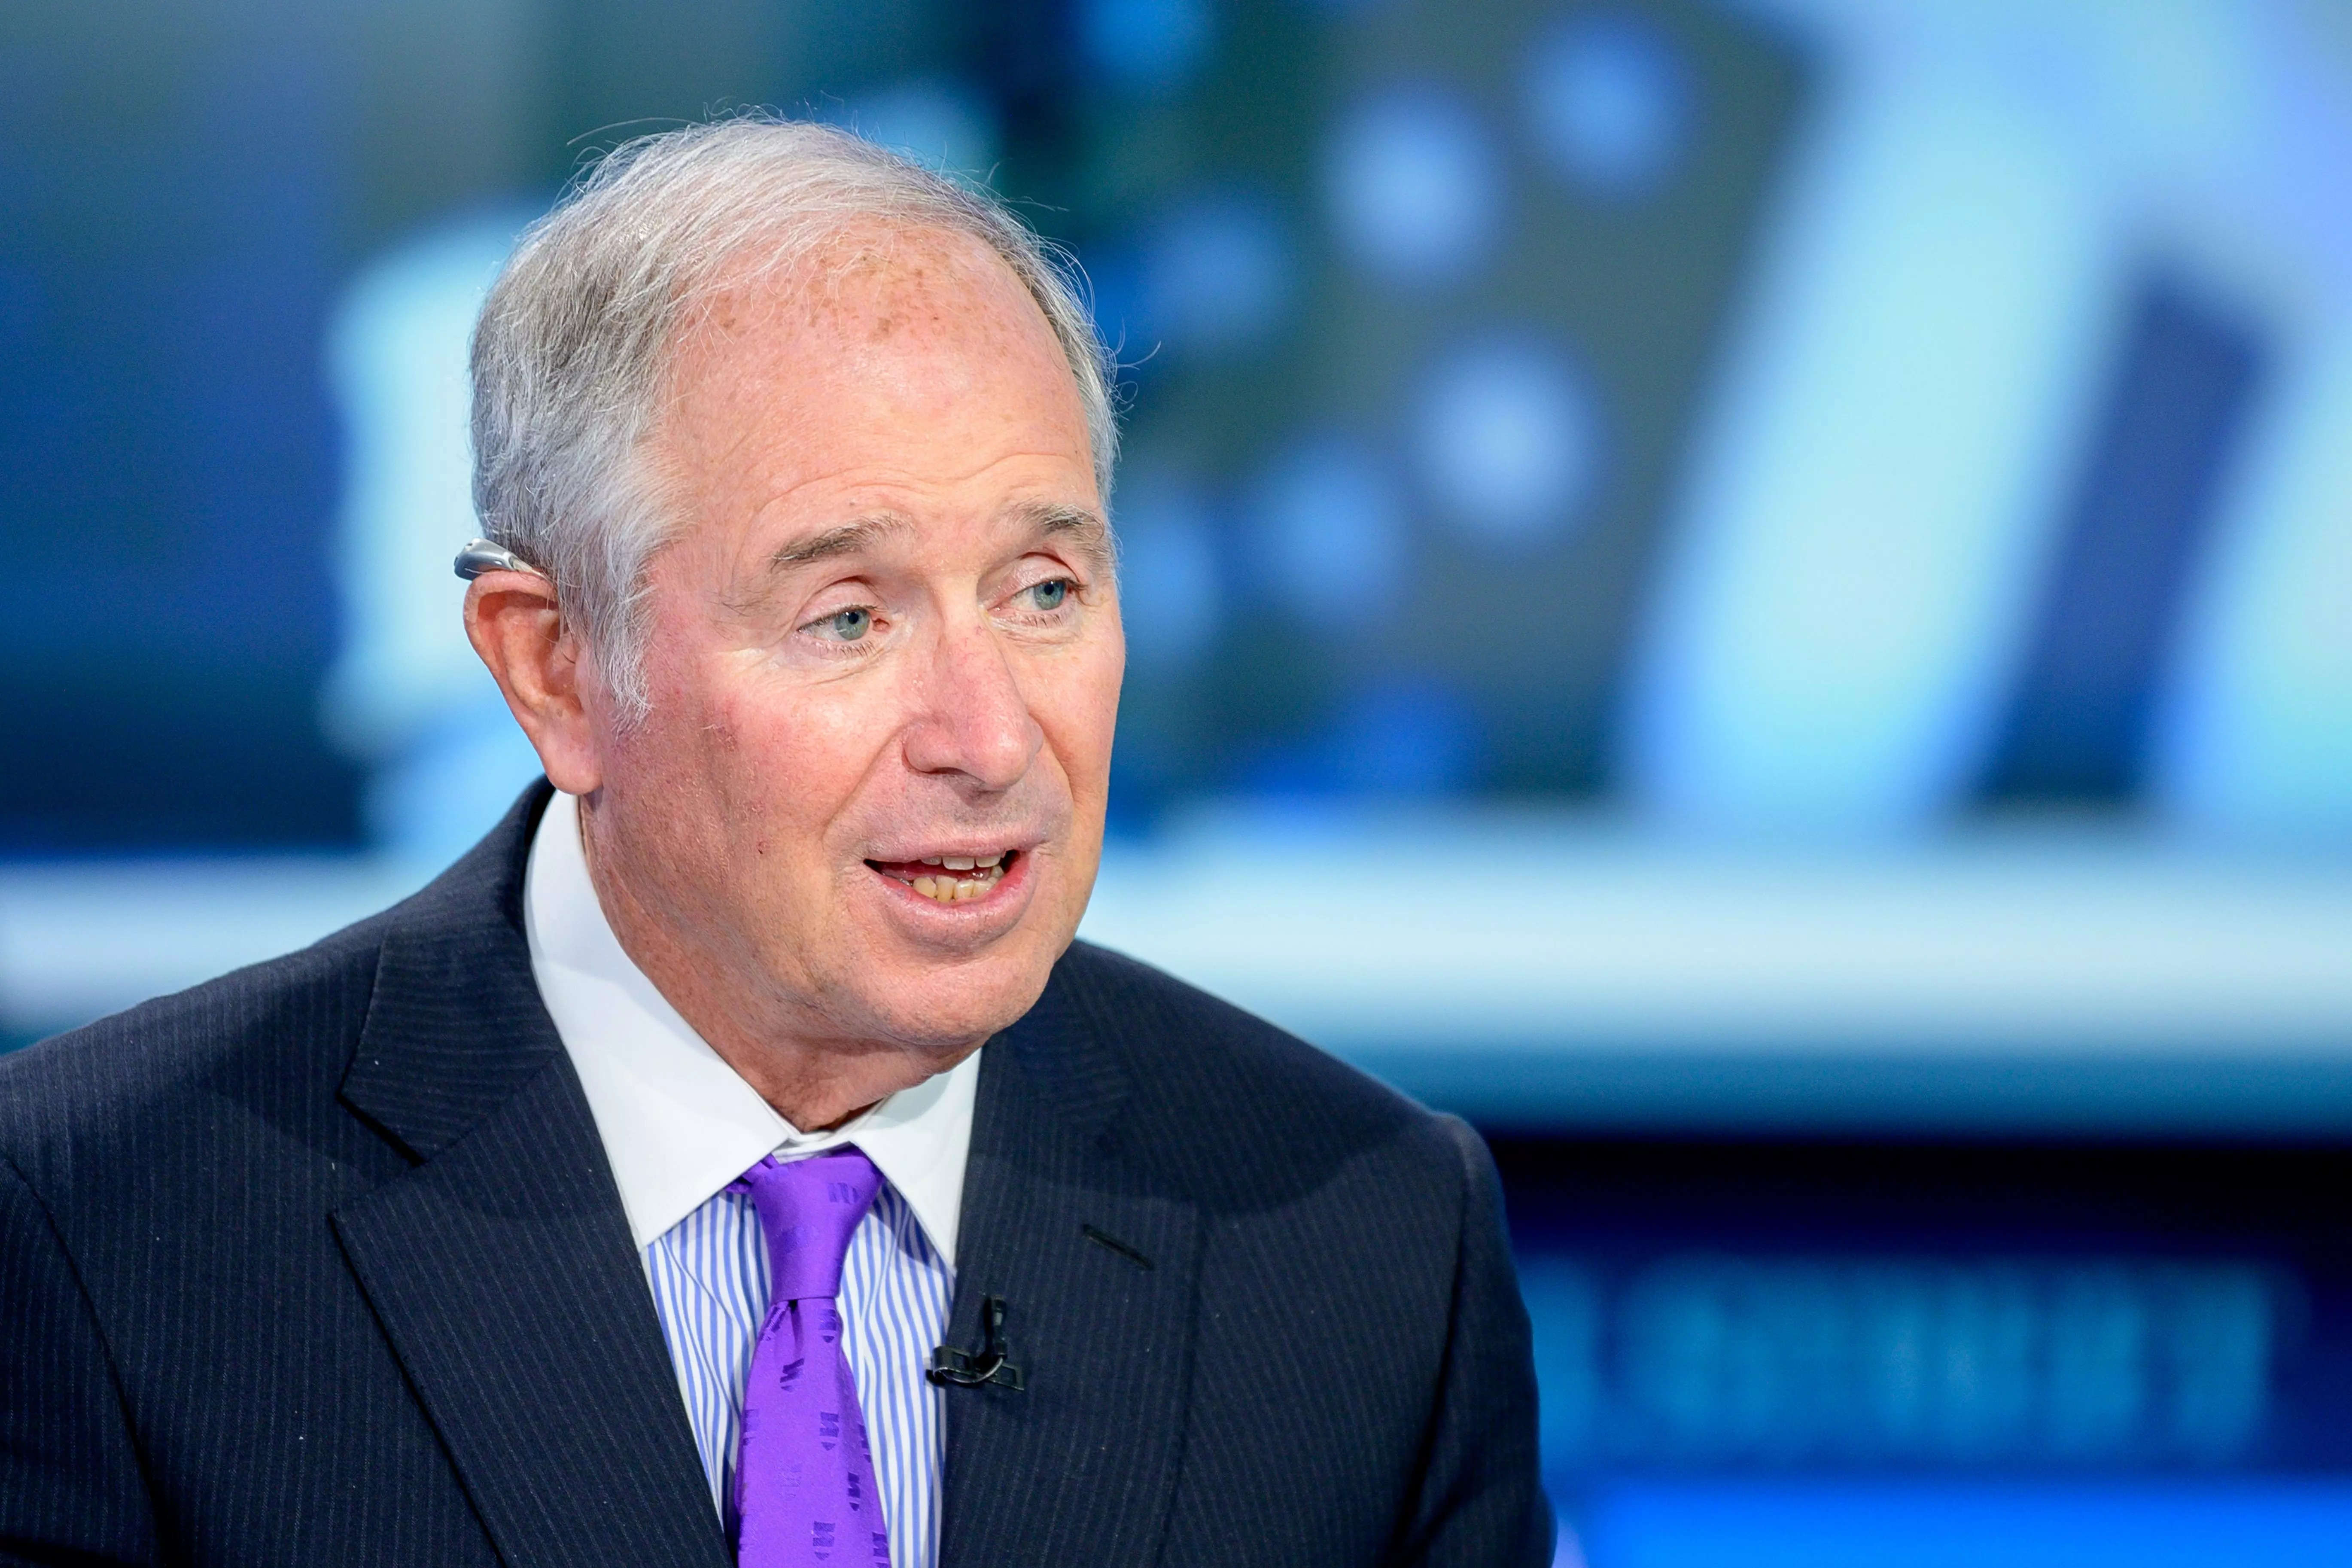 Blackstone CEO Stephen Schwarzman in front of a blue background as he visits "Maria Bartiromo